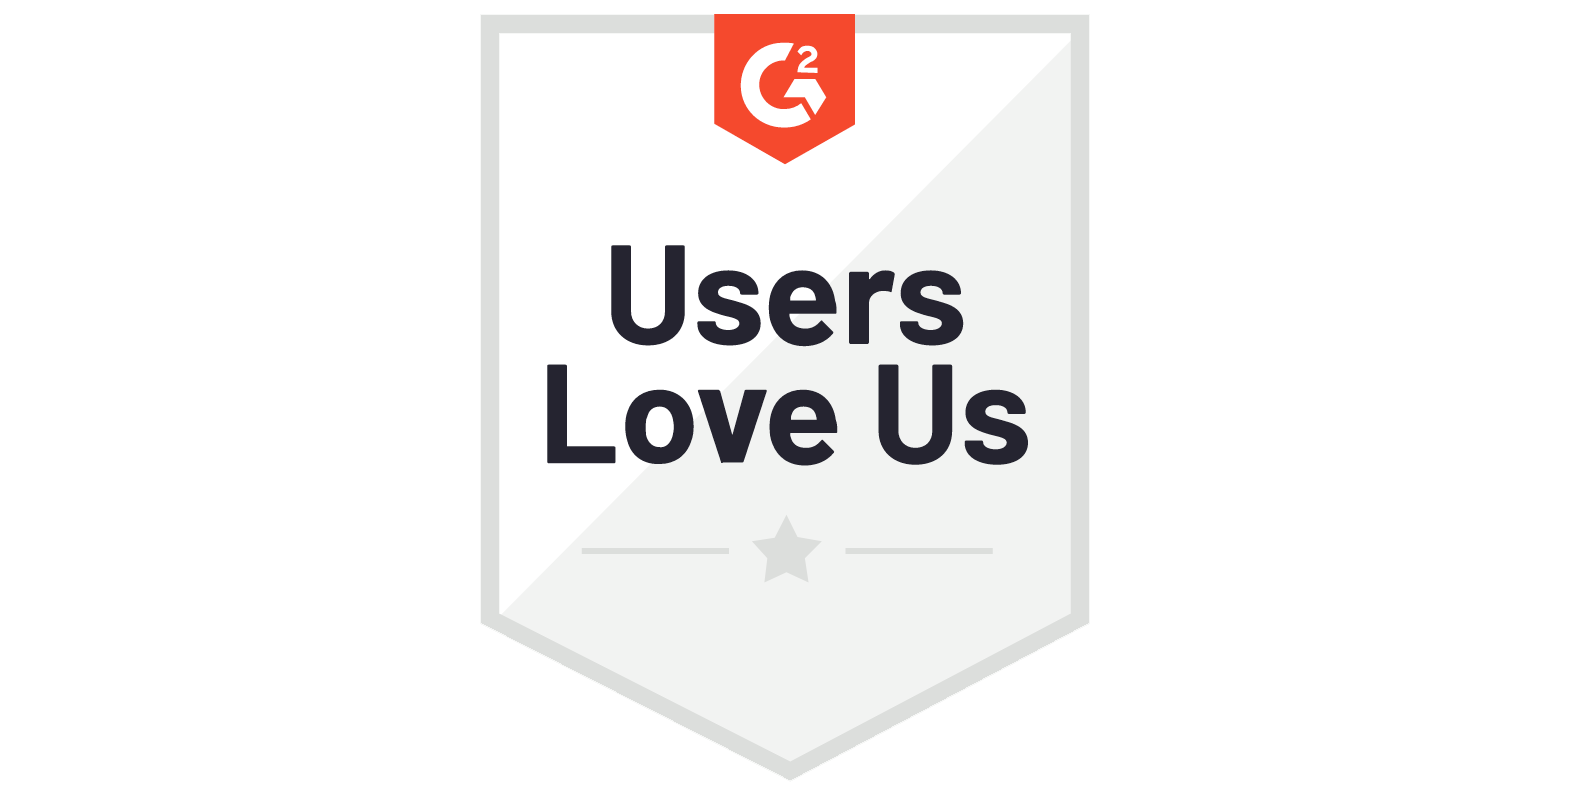 G2 users love us banner